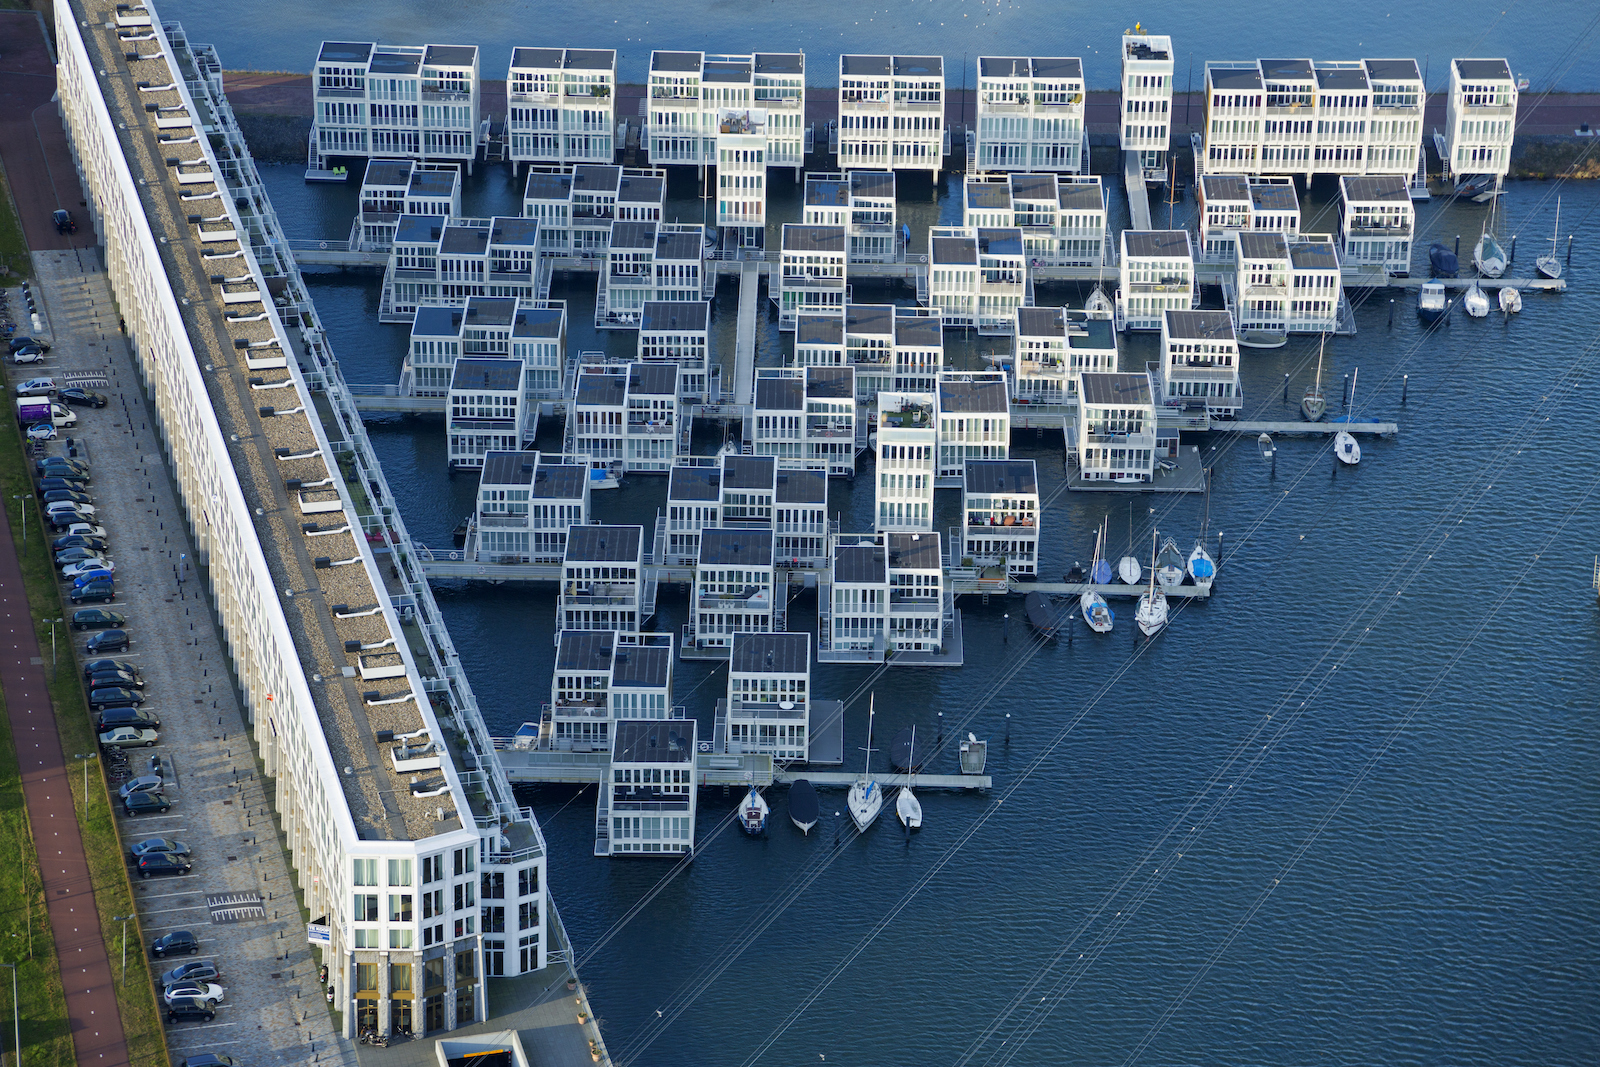 A floating community in the Netherlands lies on the coast in the IJburg section of Amsterdam. The houses are secured to large steel pilings with rolling collars that allow them to rise and fall with the water level, and sway slightly in strong winds. Each home has a small dock, communal walkways, and flexible utility connections. They are also required to be in balance, with heavy components, like kitchens and bathrooms positioned carefully on the lower floors for stability.